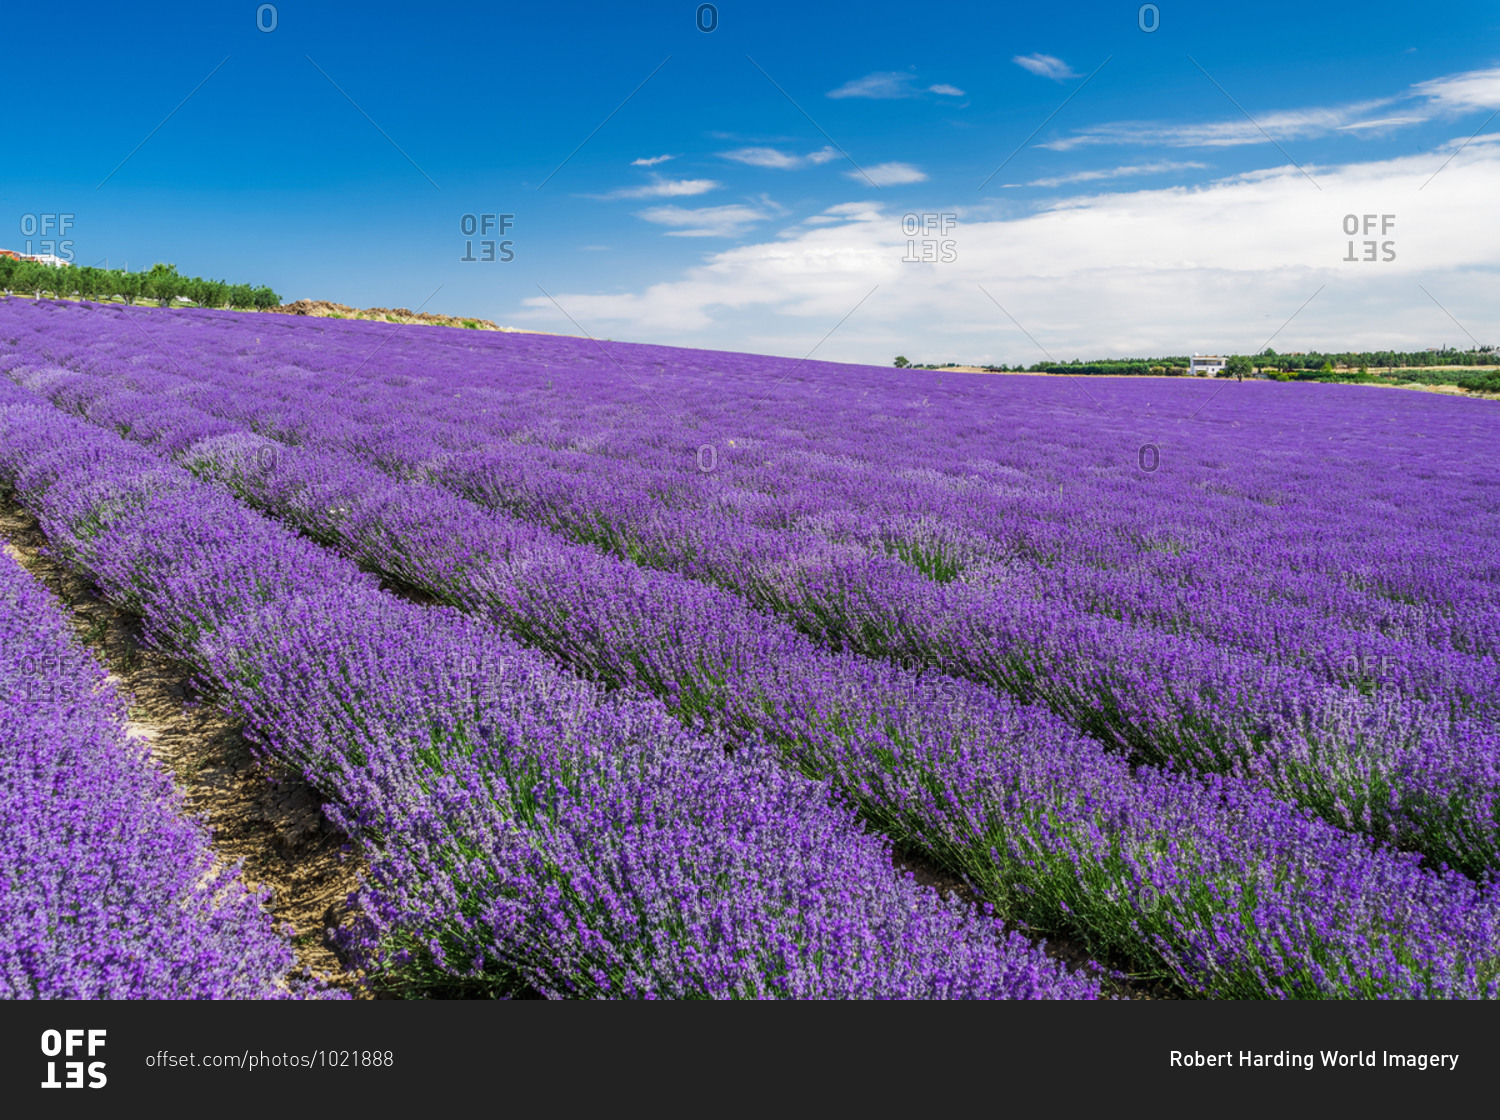 Lavender field with magenta landscape against blue sky with clouds, Greece, Europe